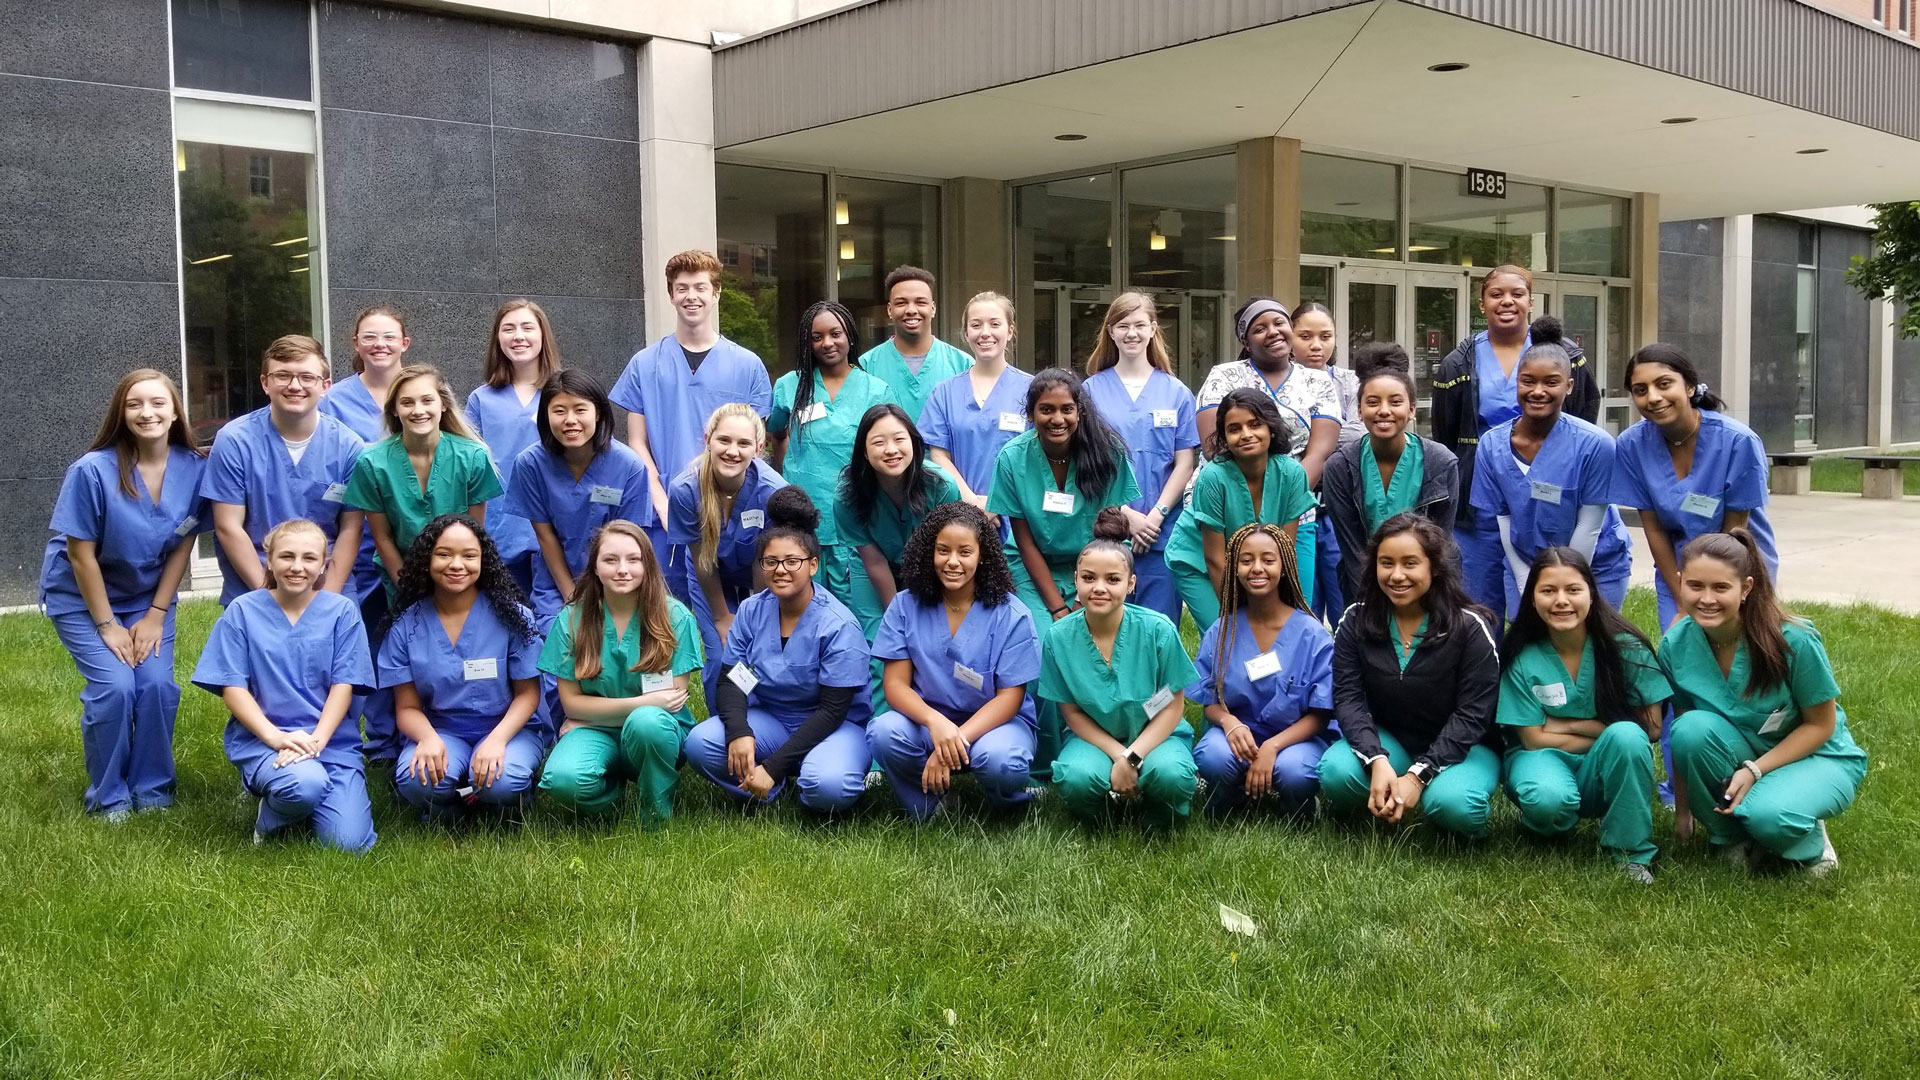 group photo of the participants of the 2019 Summer Institute for Future Nurses program